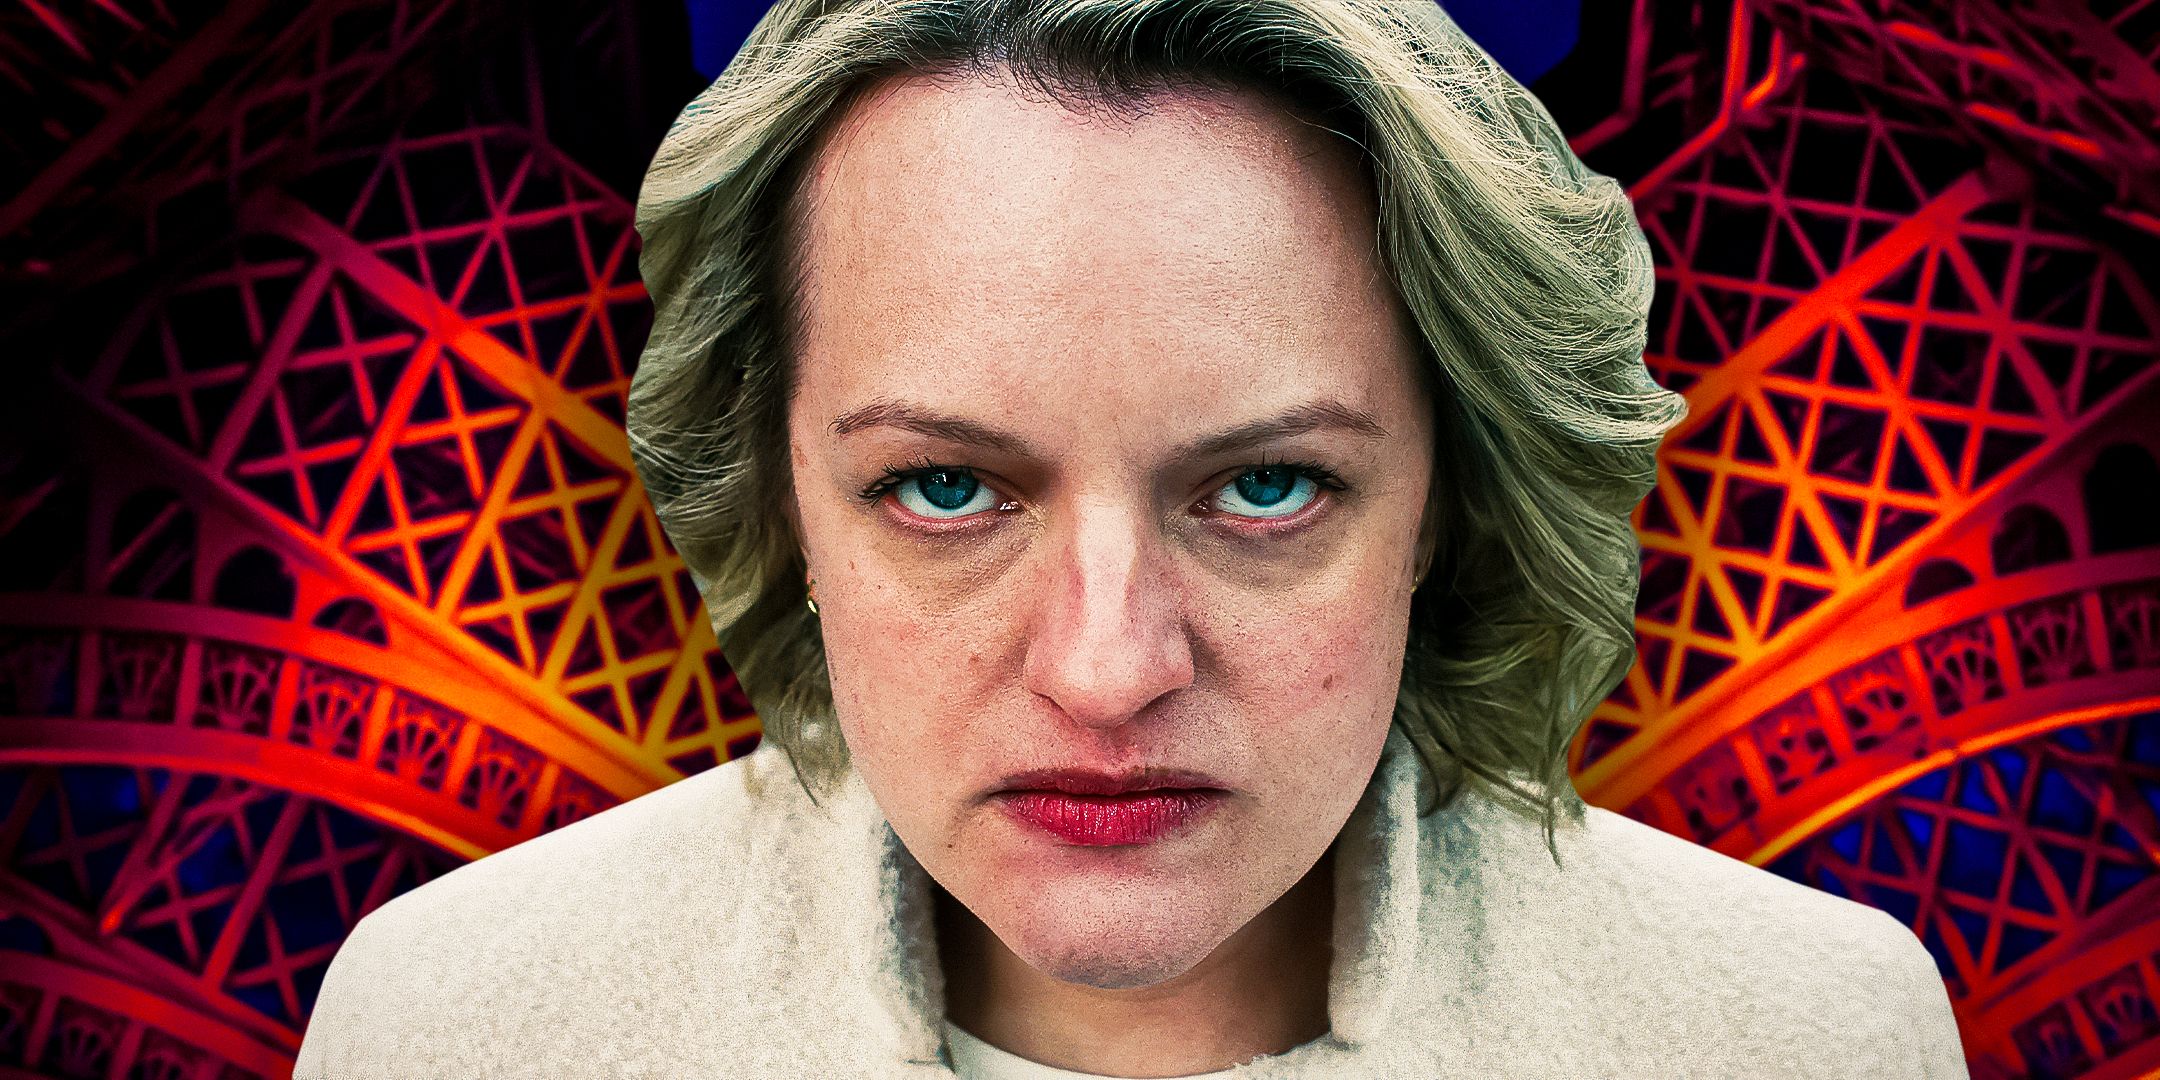 Elisabeth Moss as June Osborne looking serious in The Handmaid's Tale with Eiffel Tower background